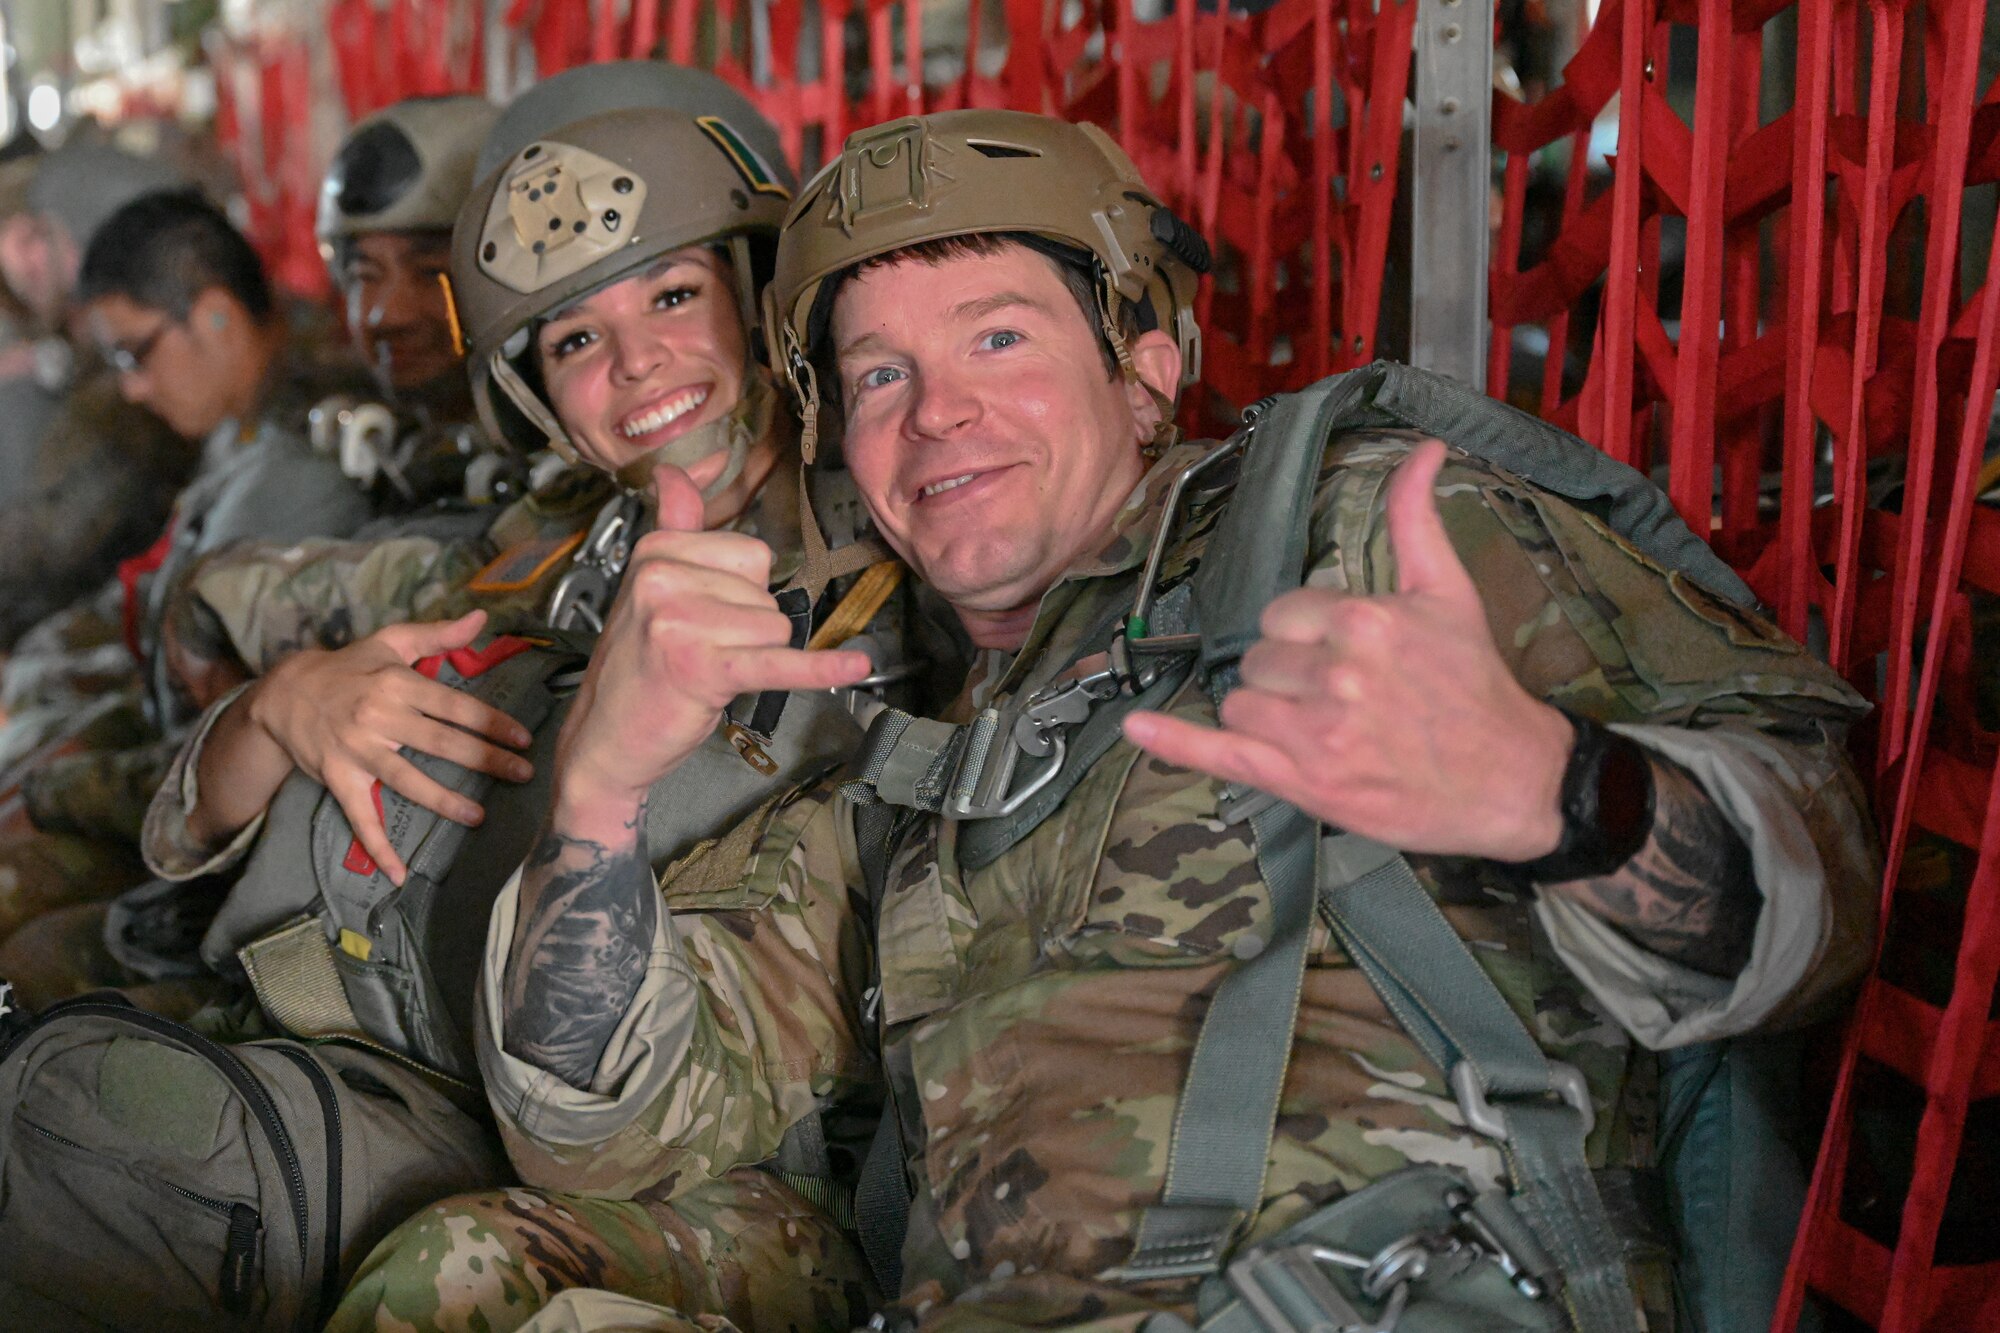 Paratroopers pose for a photo.